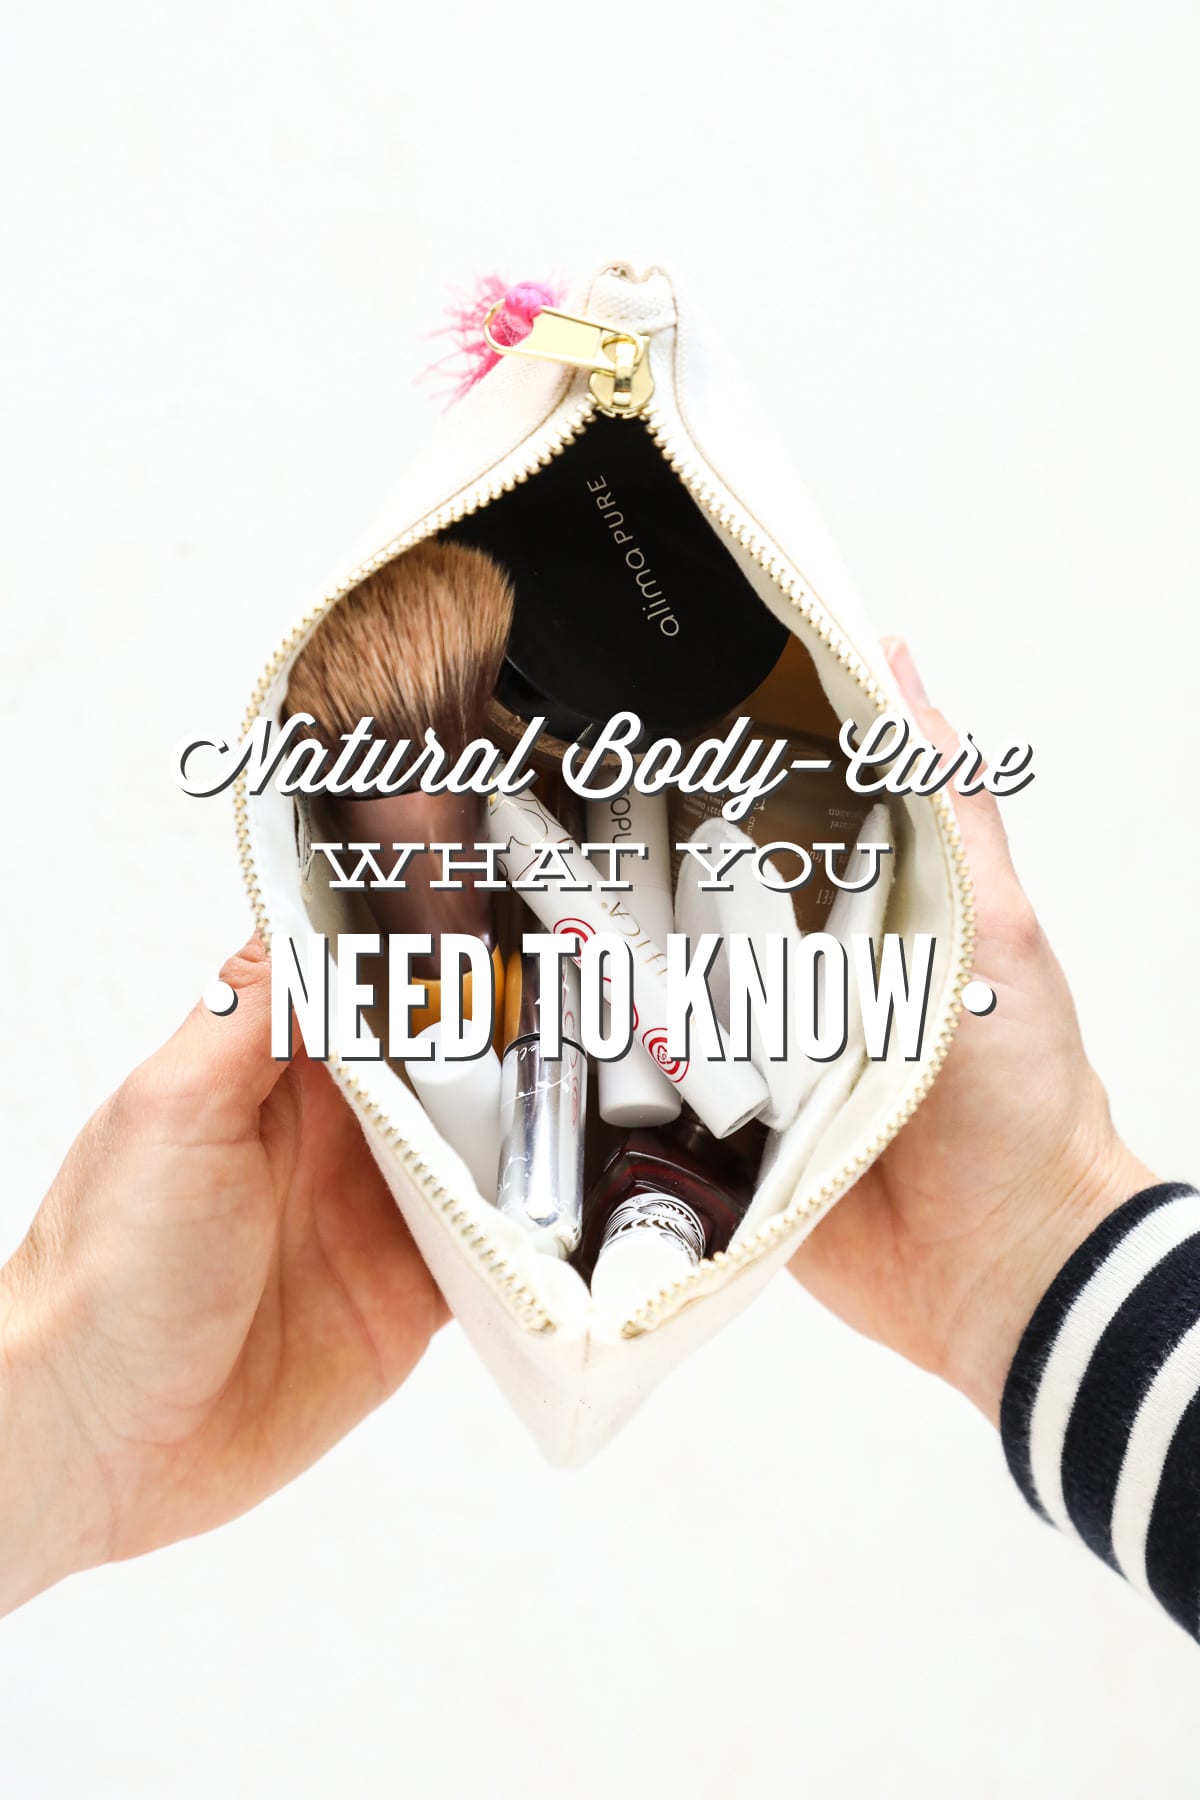 Natural Body-Care: How to Read Ingredient Lists & Find Non-Toxic Body Products